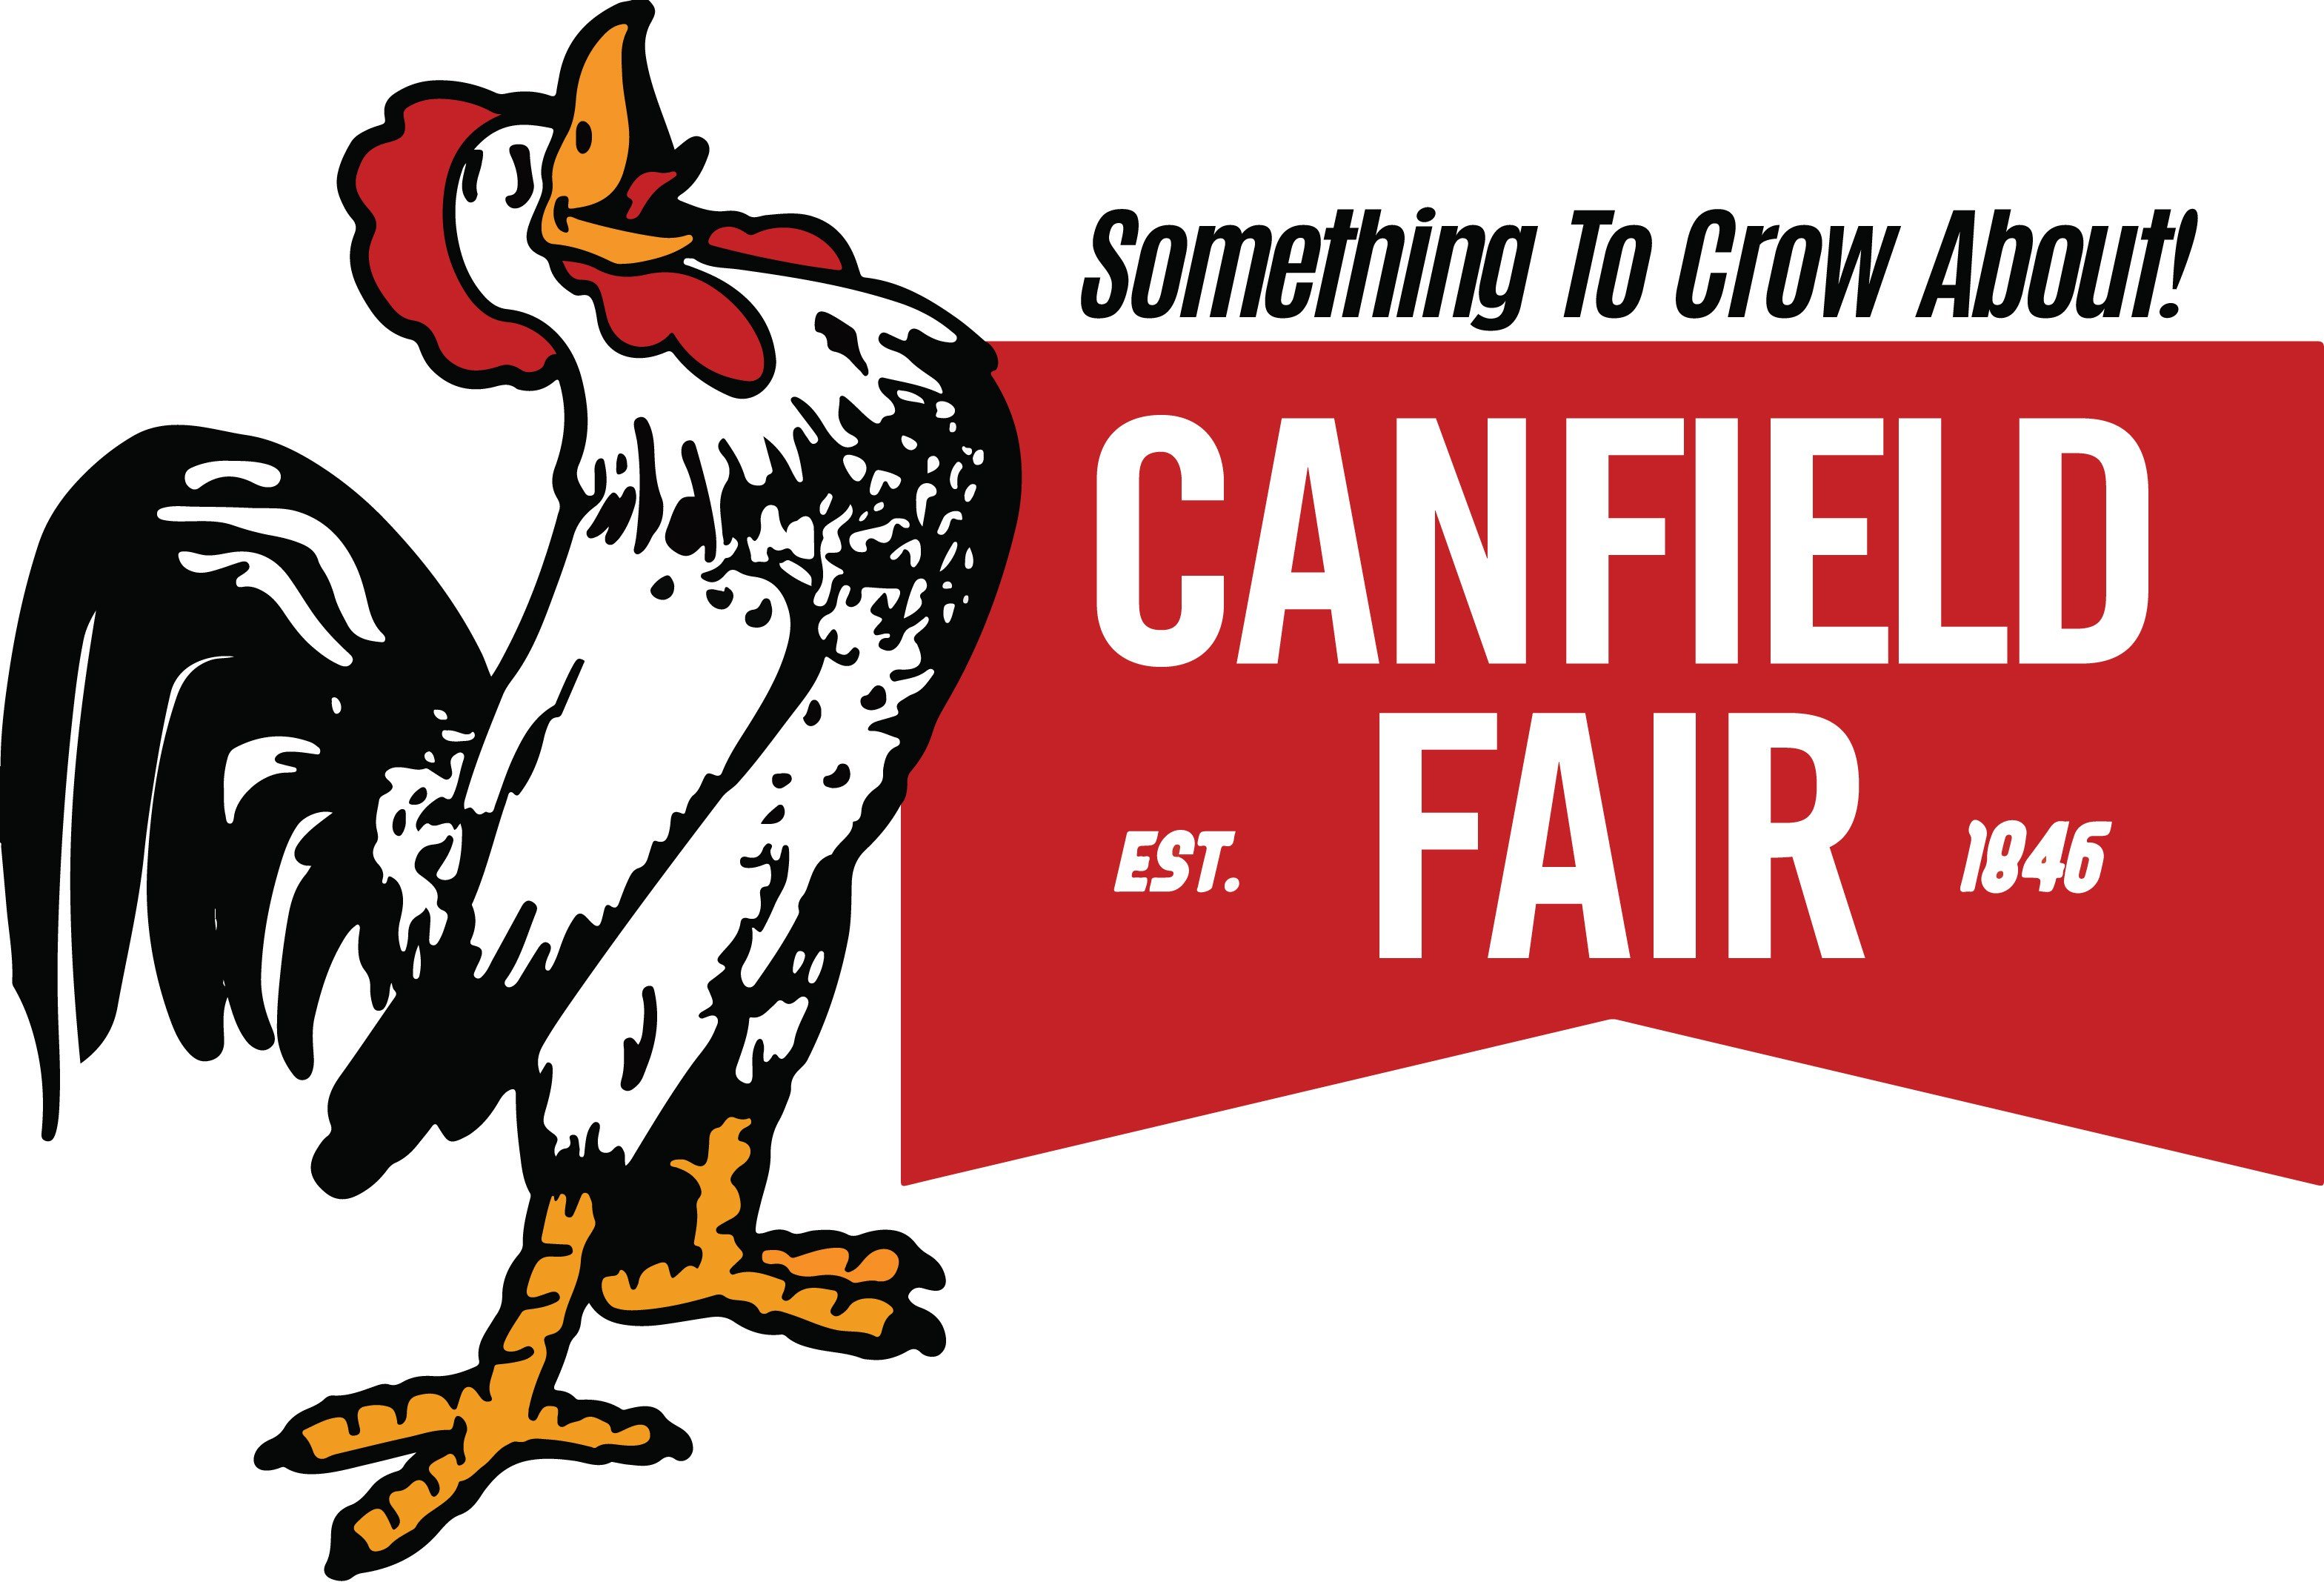 Canfield Fair Celebrates 170 Years Events Day by Day